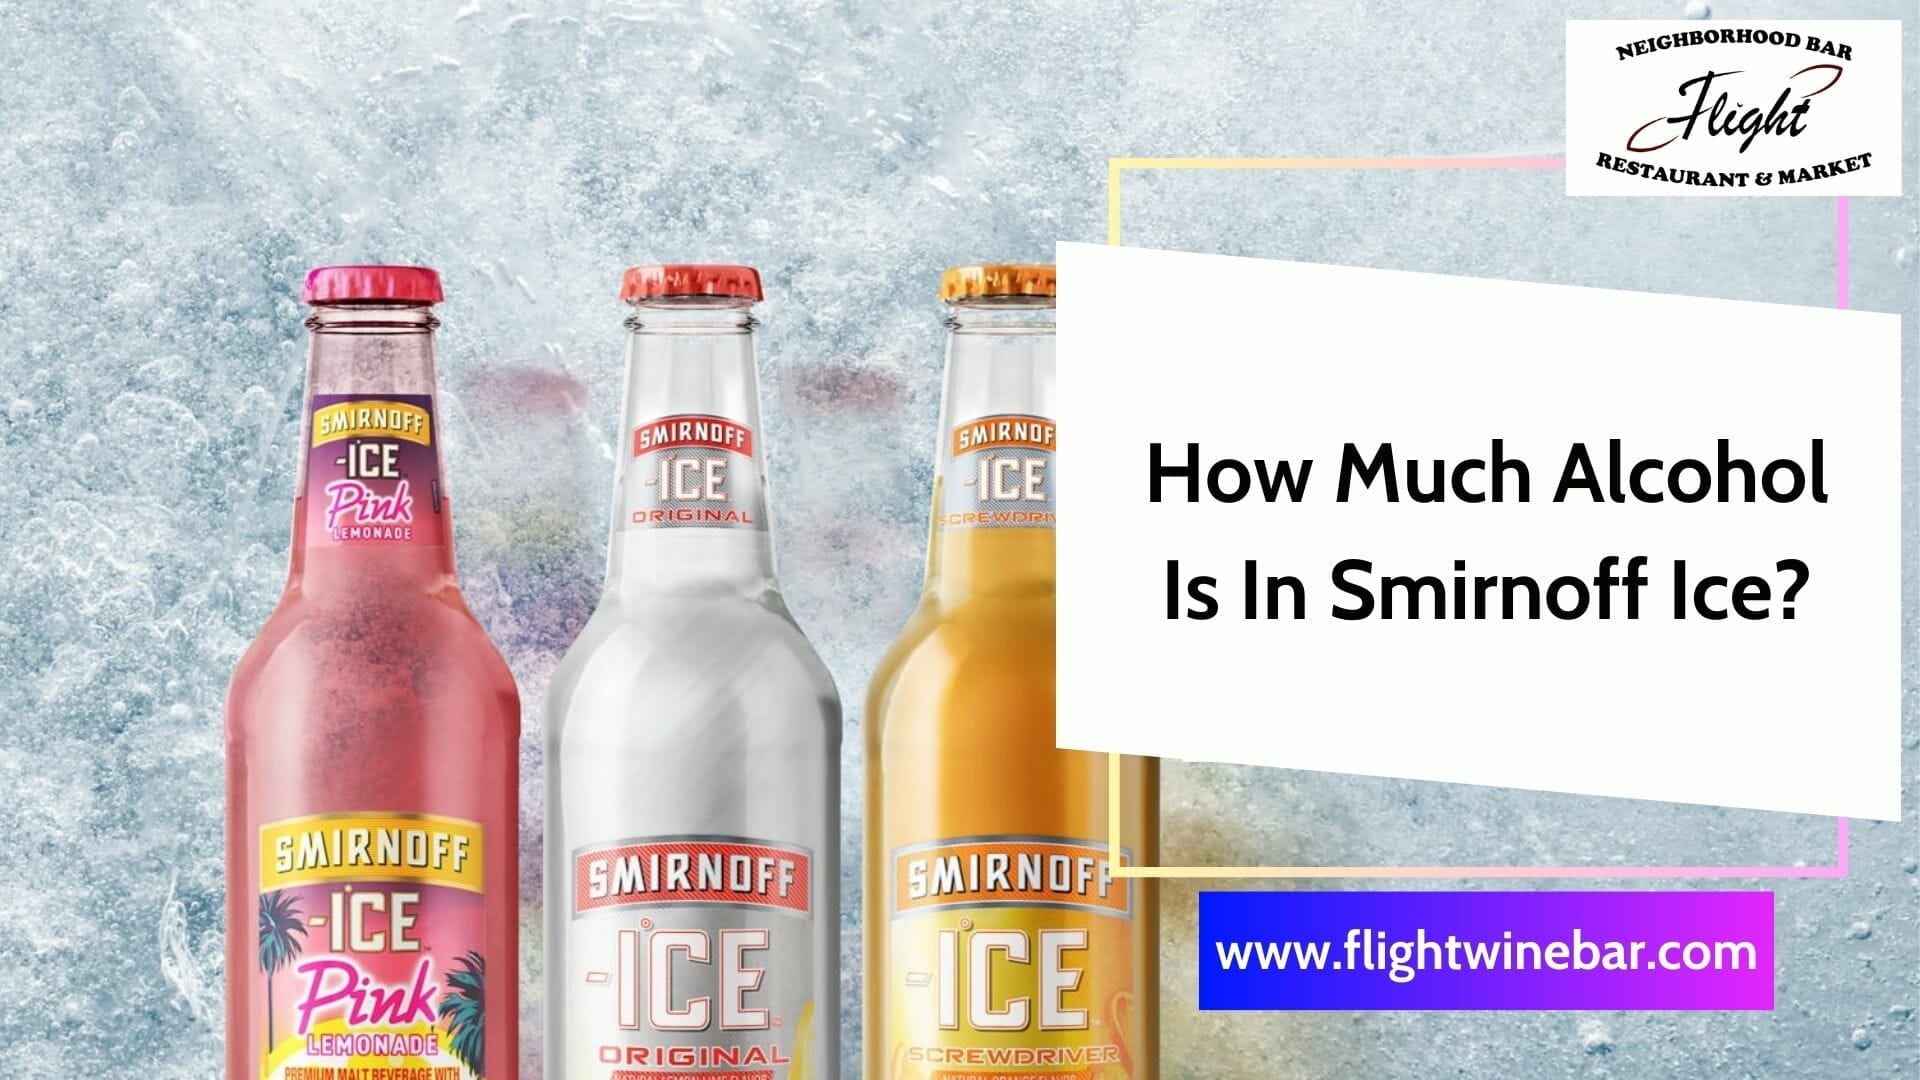 How Much Alcohol Is In Smirnoff Ice